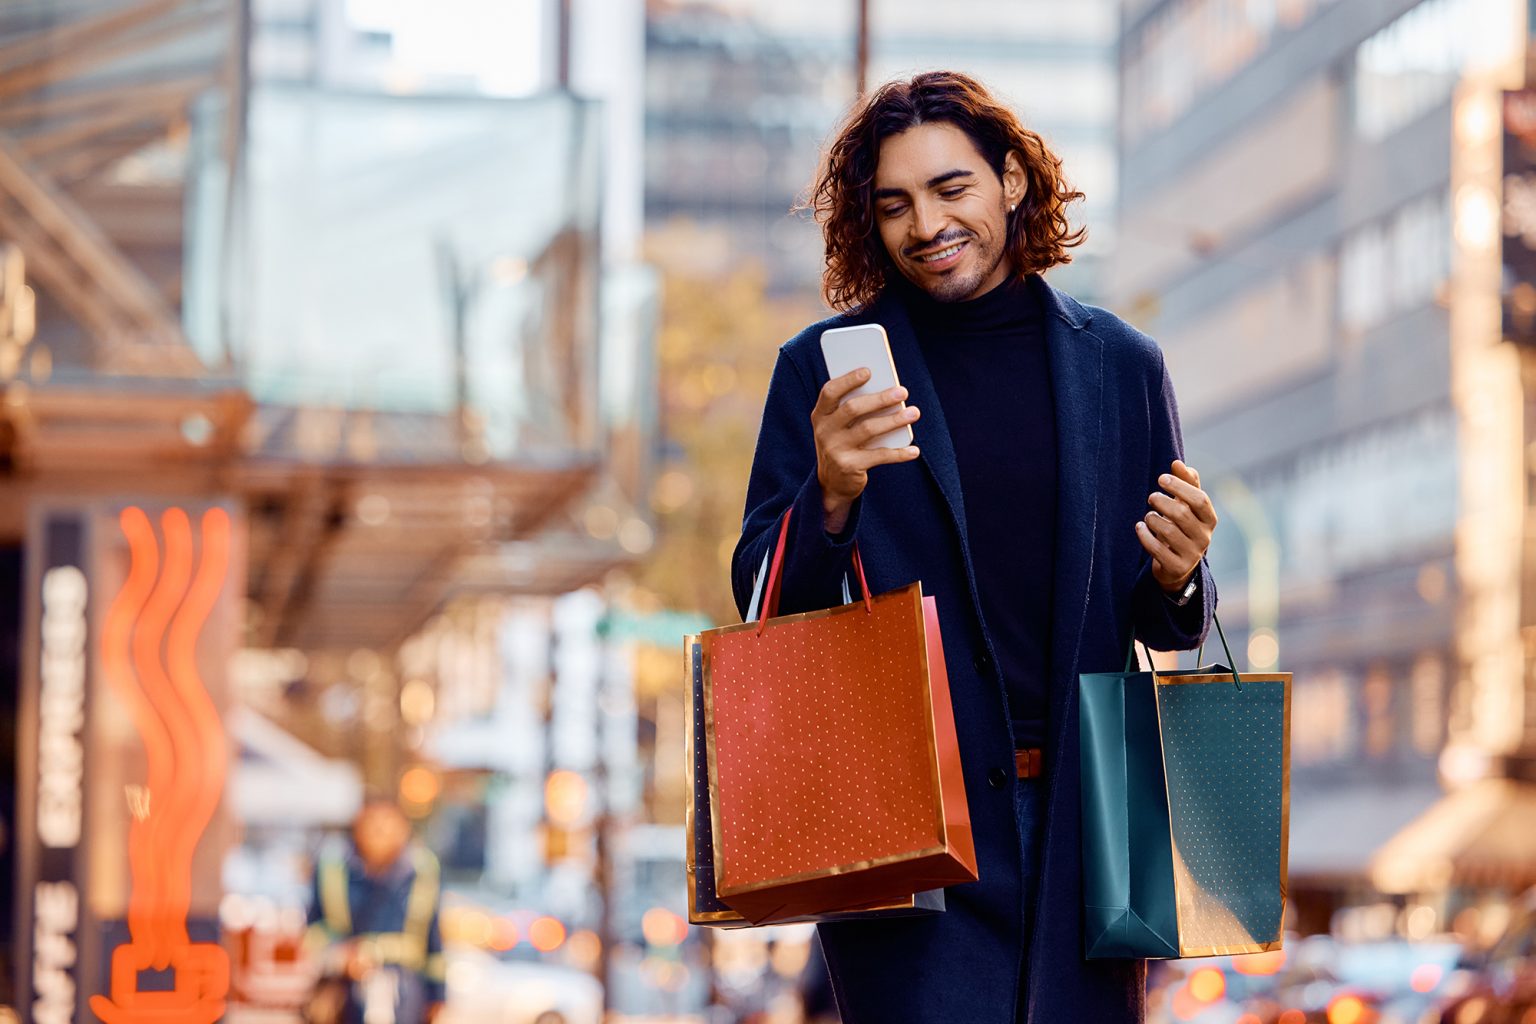 Young man looking at a cell phone with shopping bags on a city street